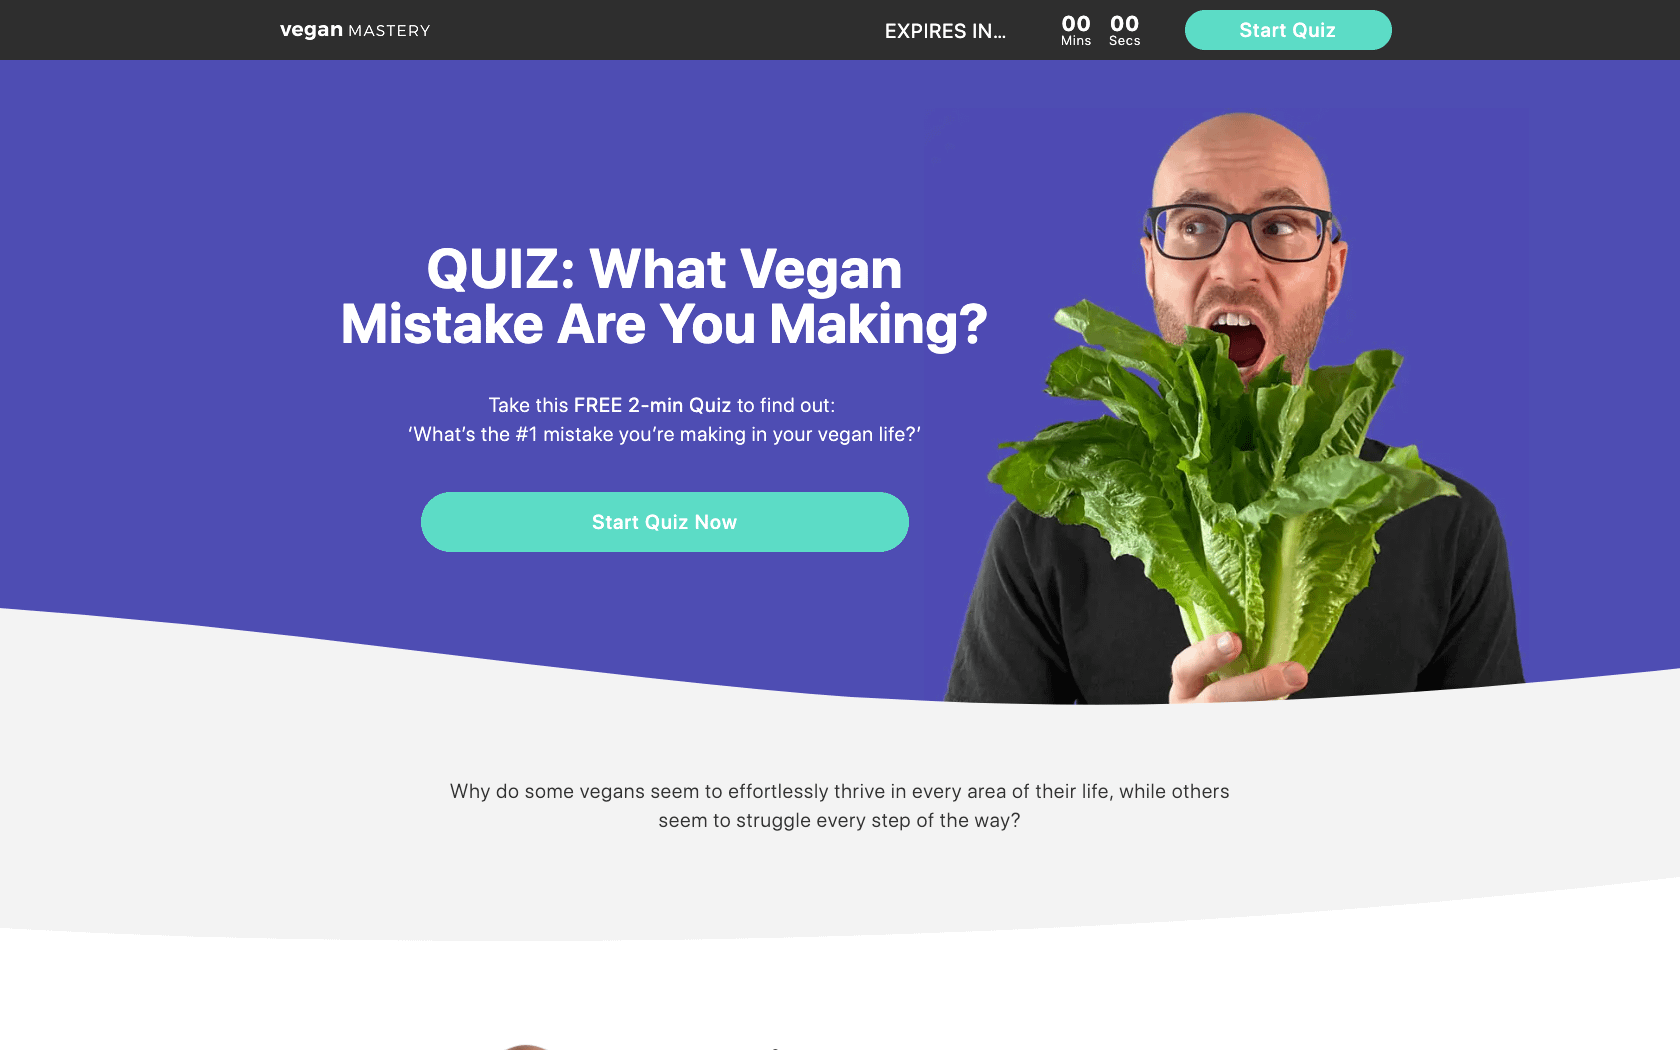 QUIZ: What Vegan Mistake Are You Making?